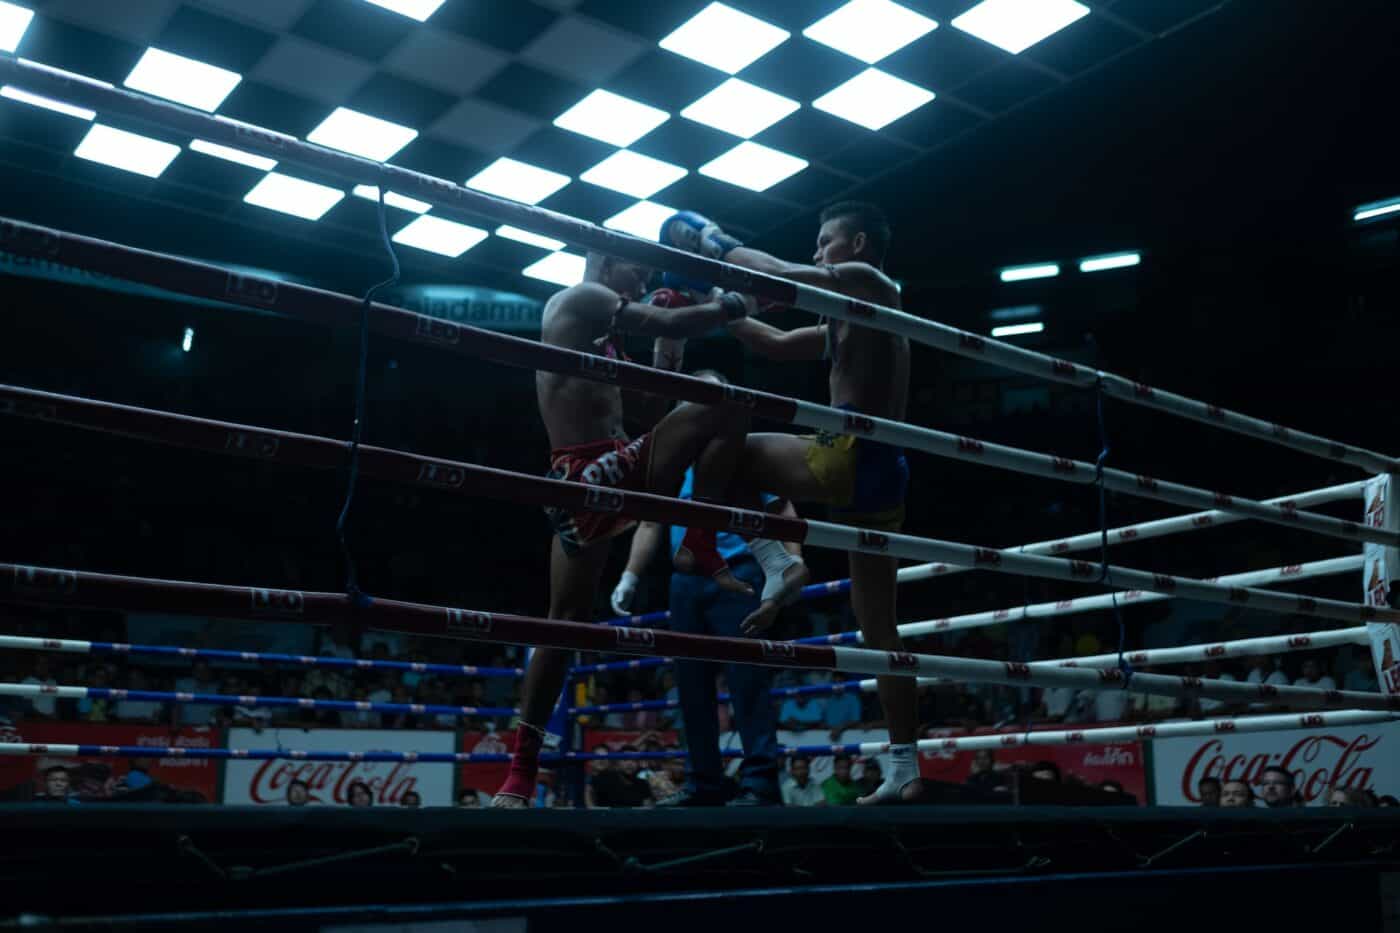 muay thai fighters in thailand